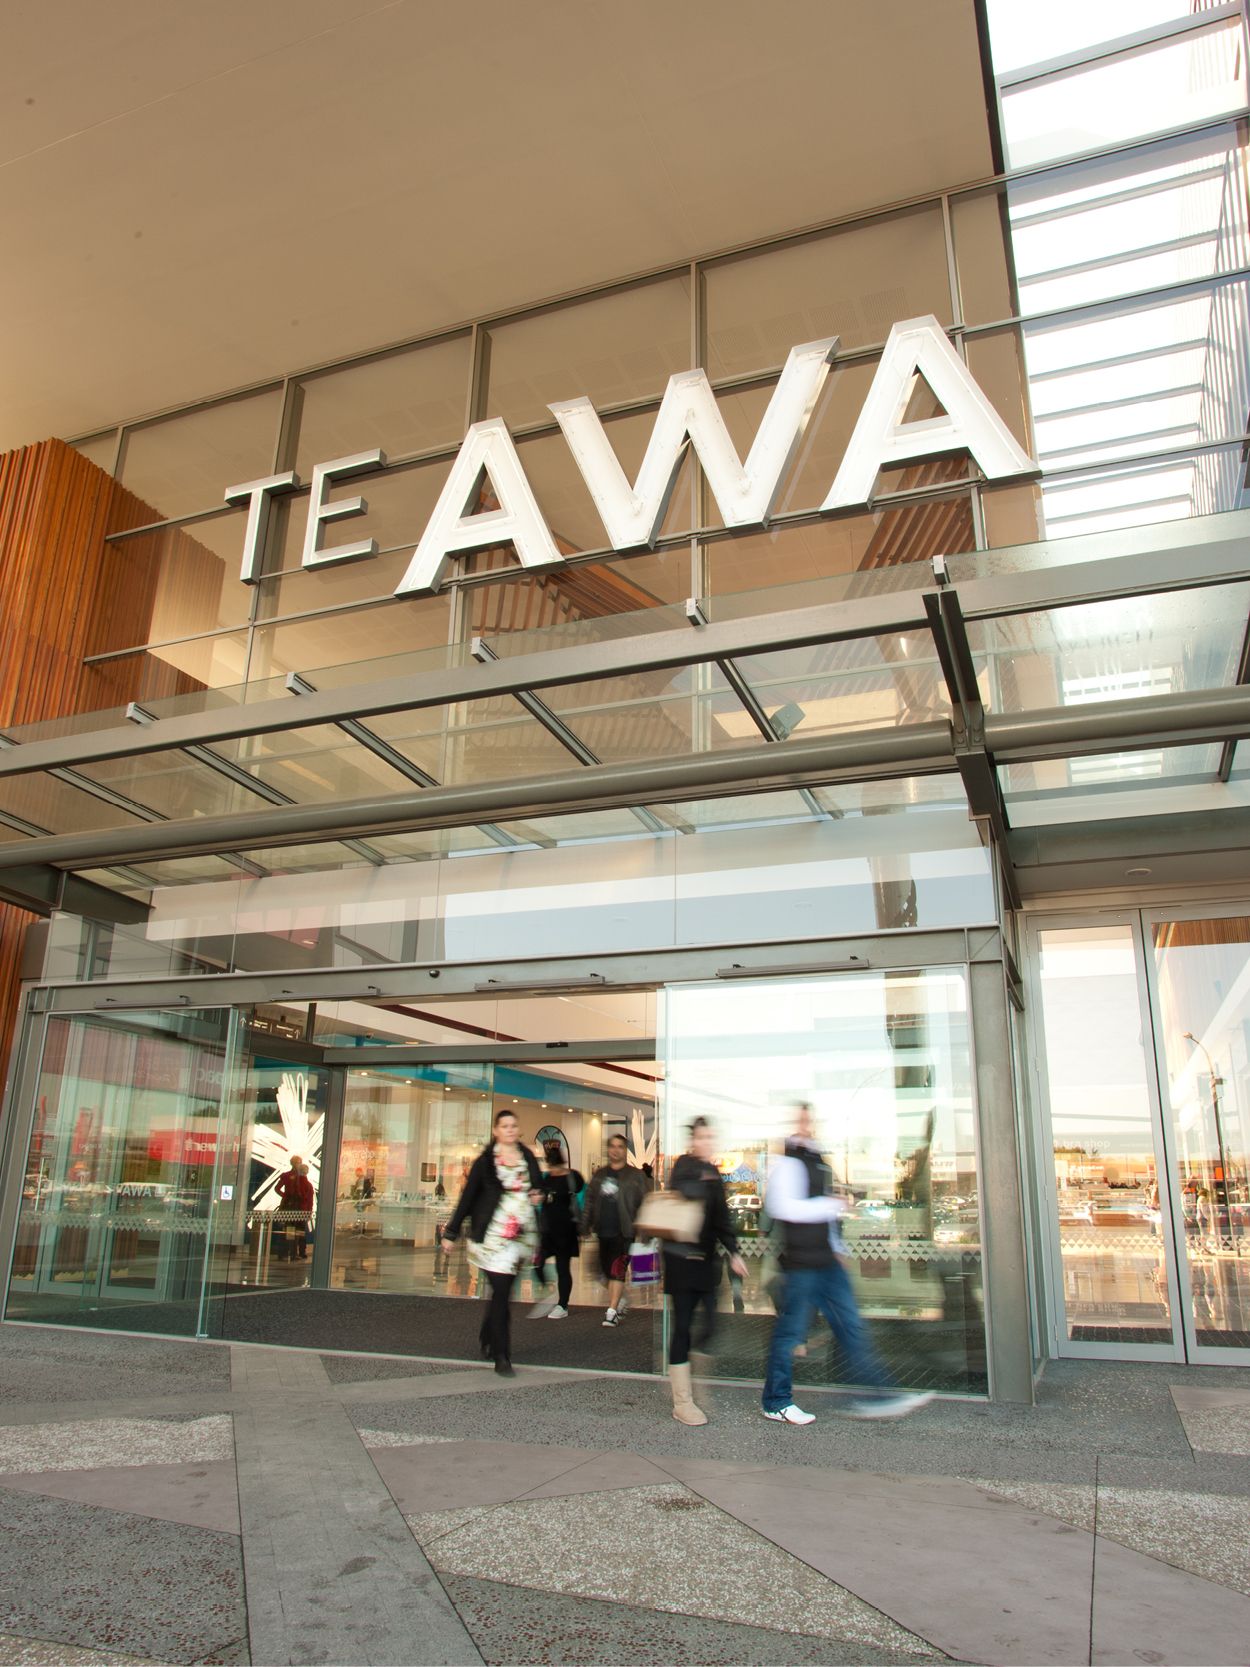 Te Awa signage at one of the mall's entrances